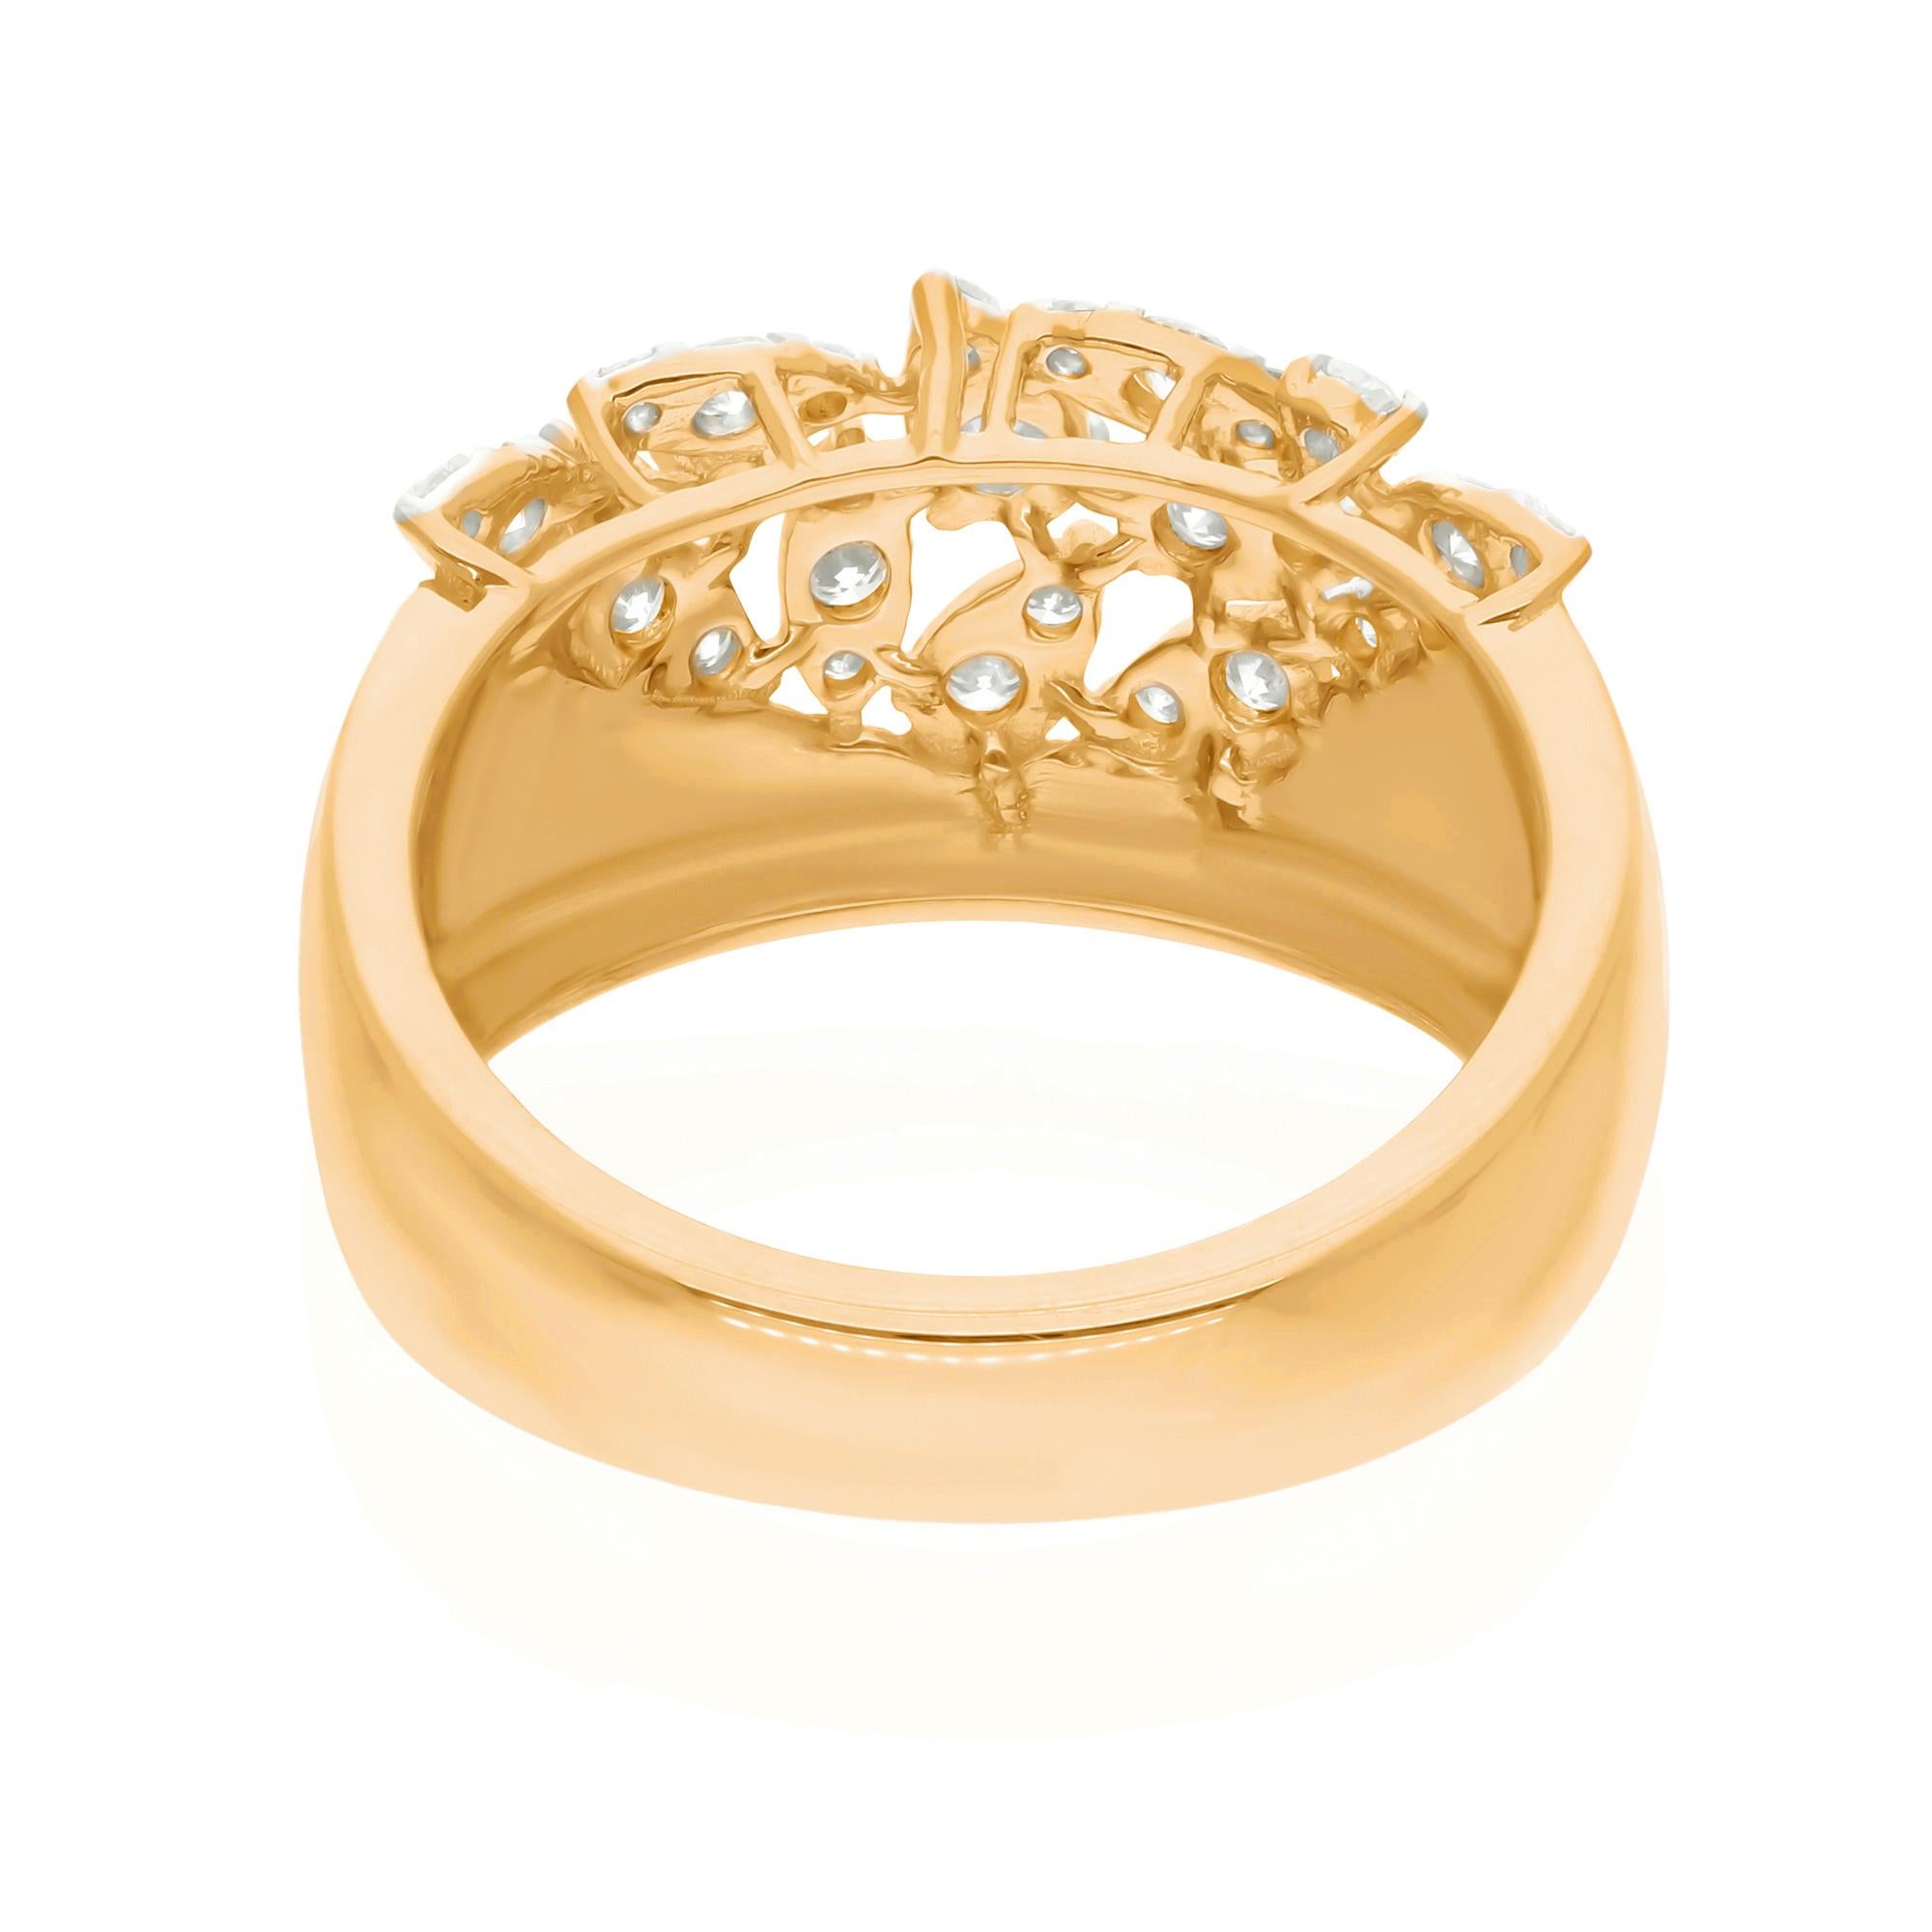 The setting, expertly crafted in 18 karat yellow gold, adds warmth and richness to the piece. Handmade with precision and attention to detail, the gold band boasts a seamless blend of traditional craftsmanship and contemporary design.

Item Code :-